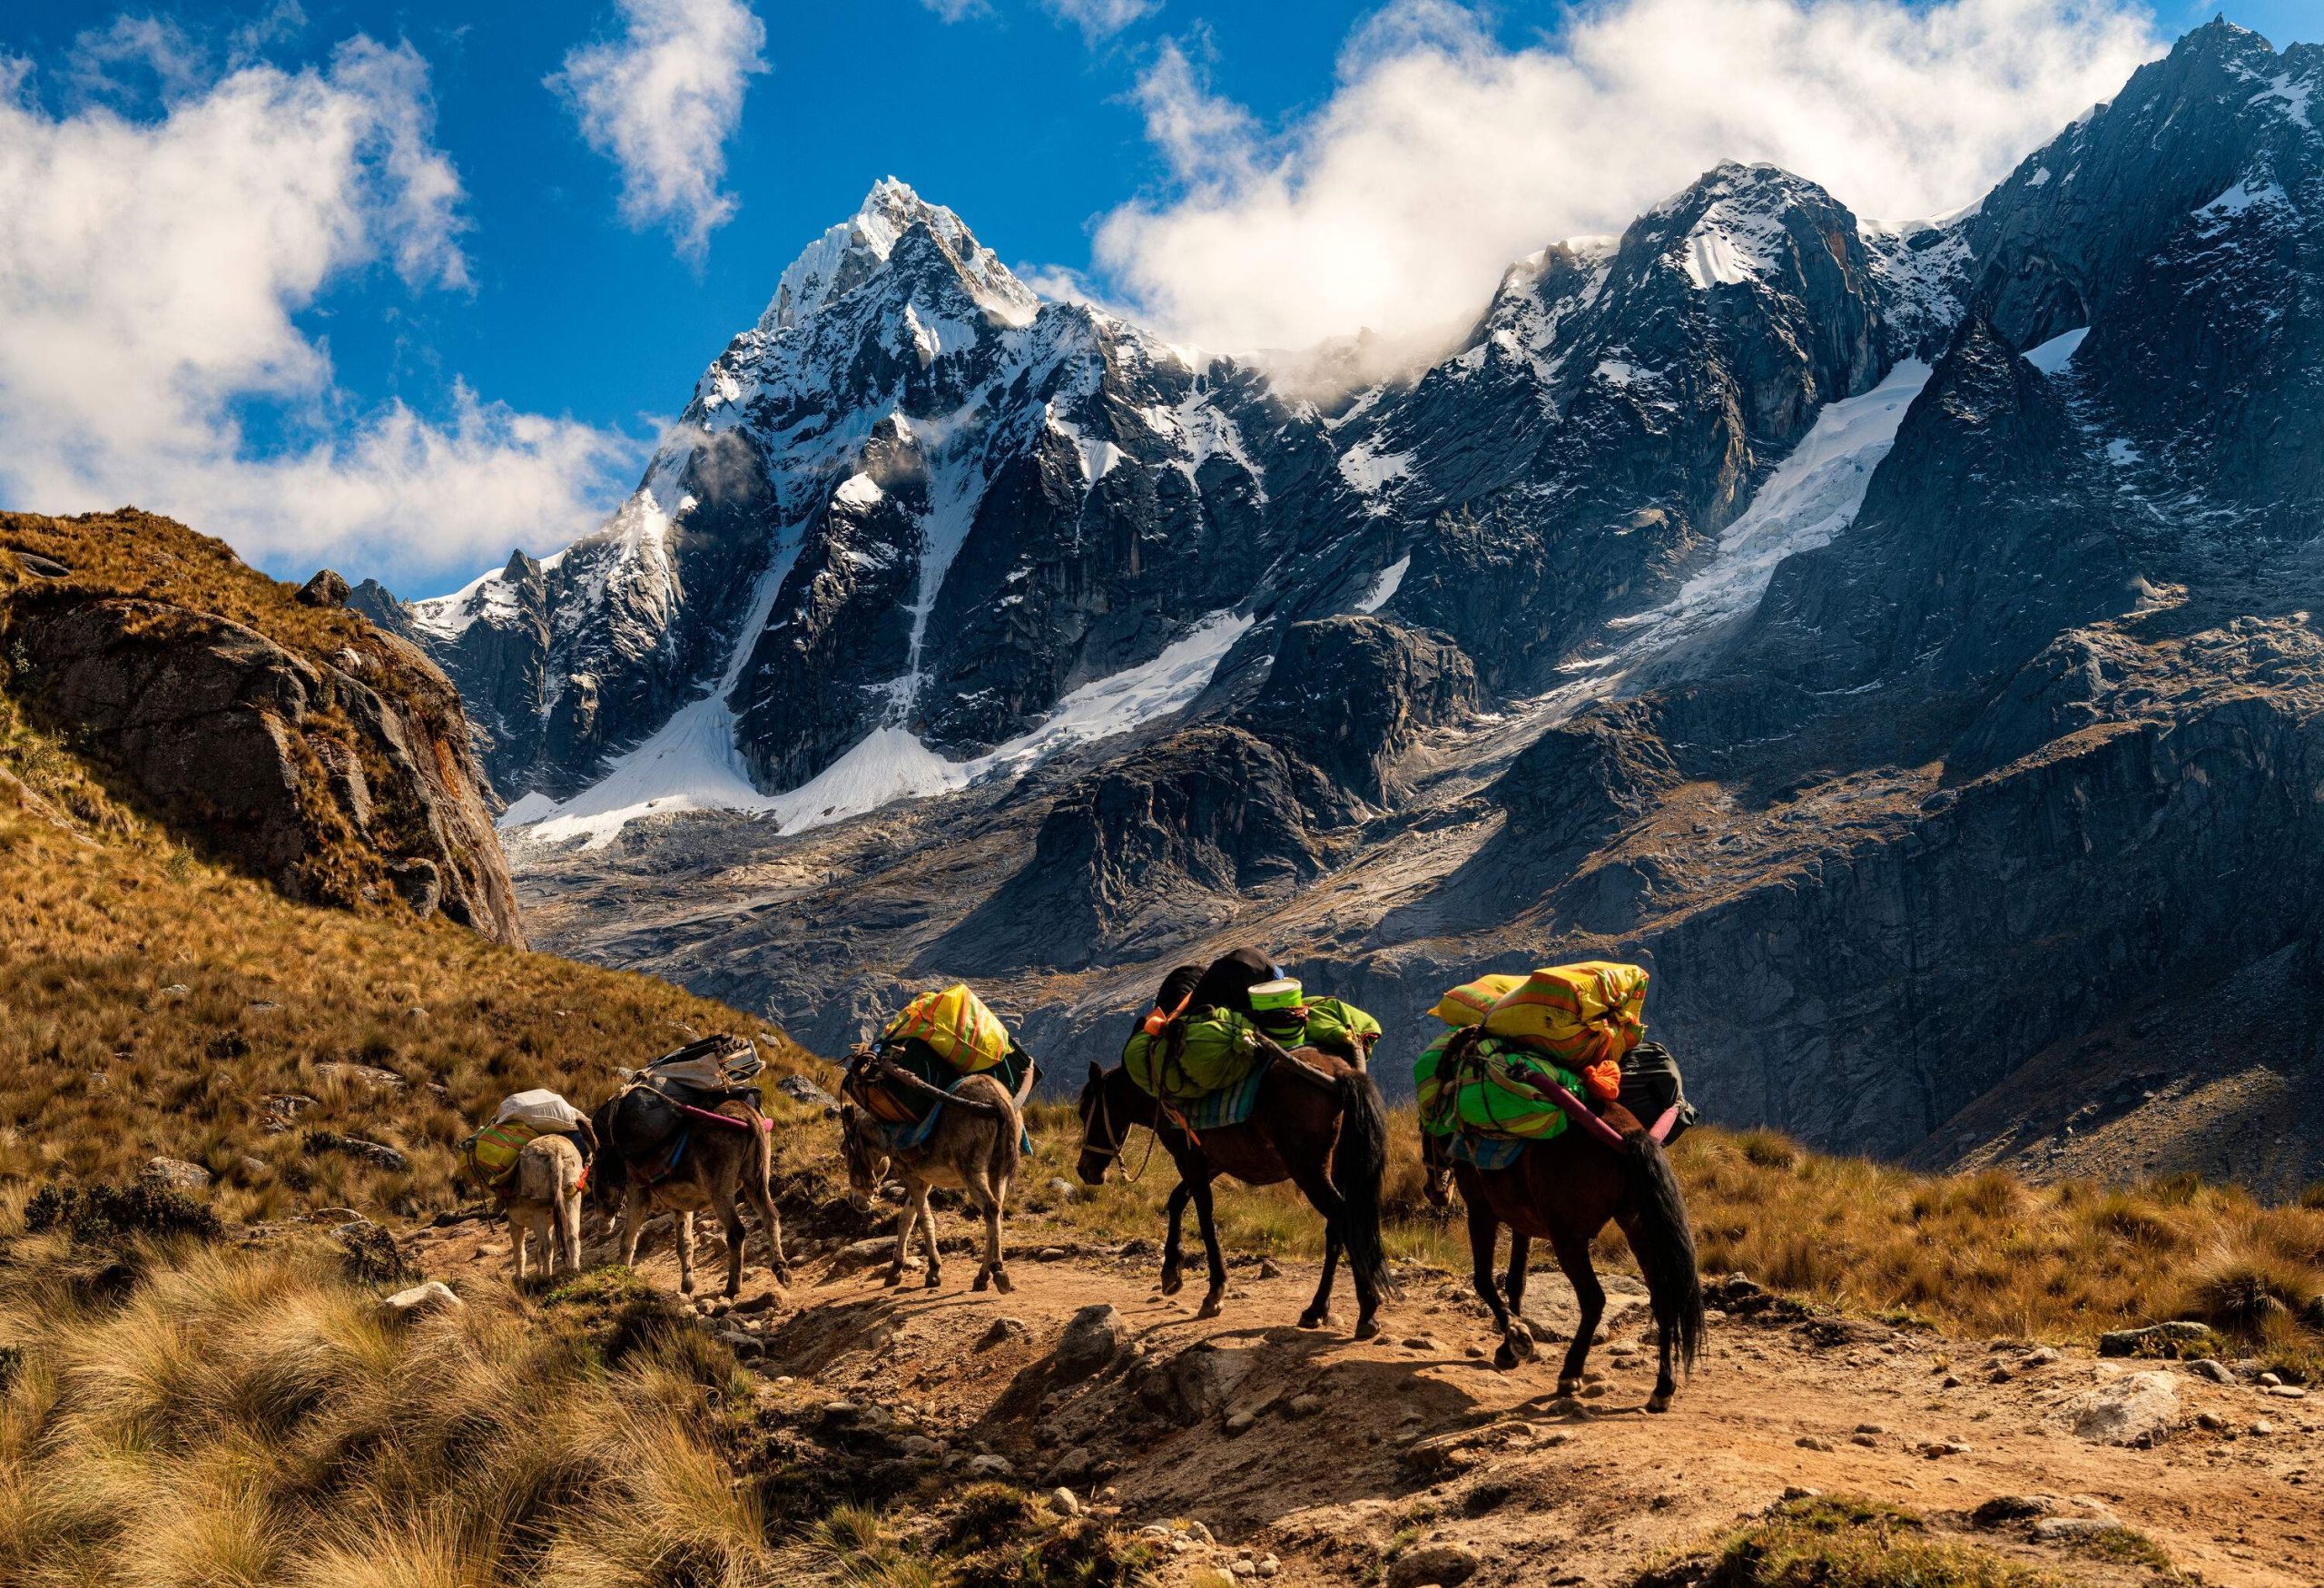 A row of donkeys carrying luggage walking on a trail across snowy mountains.